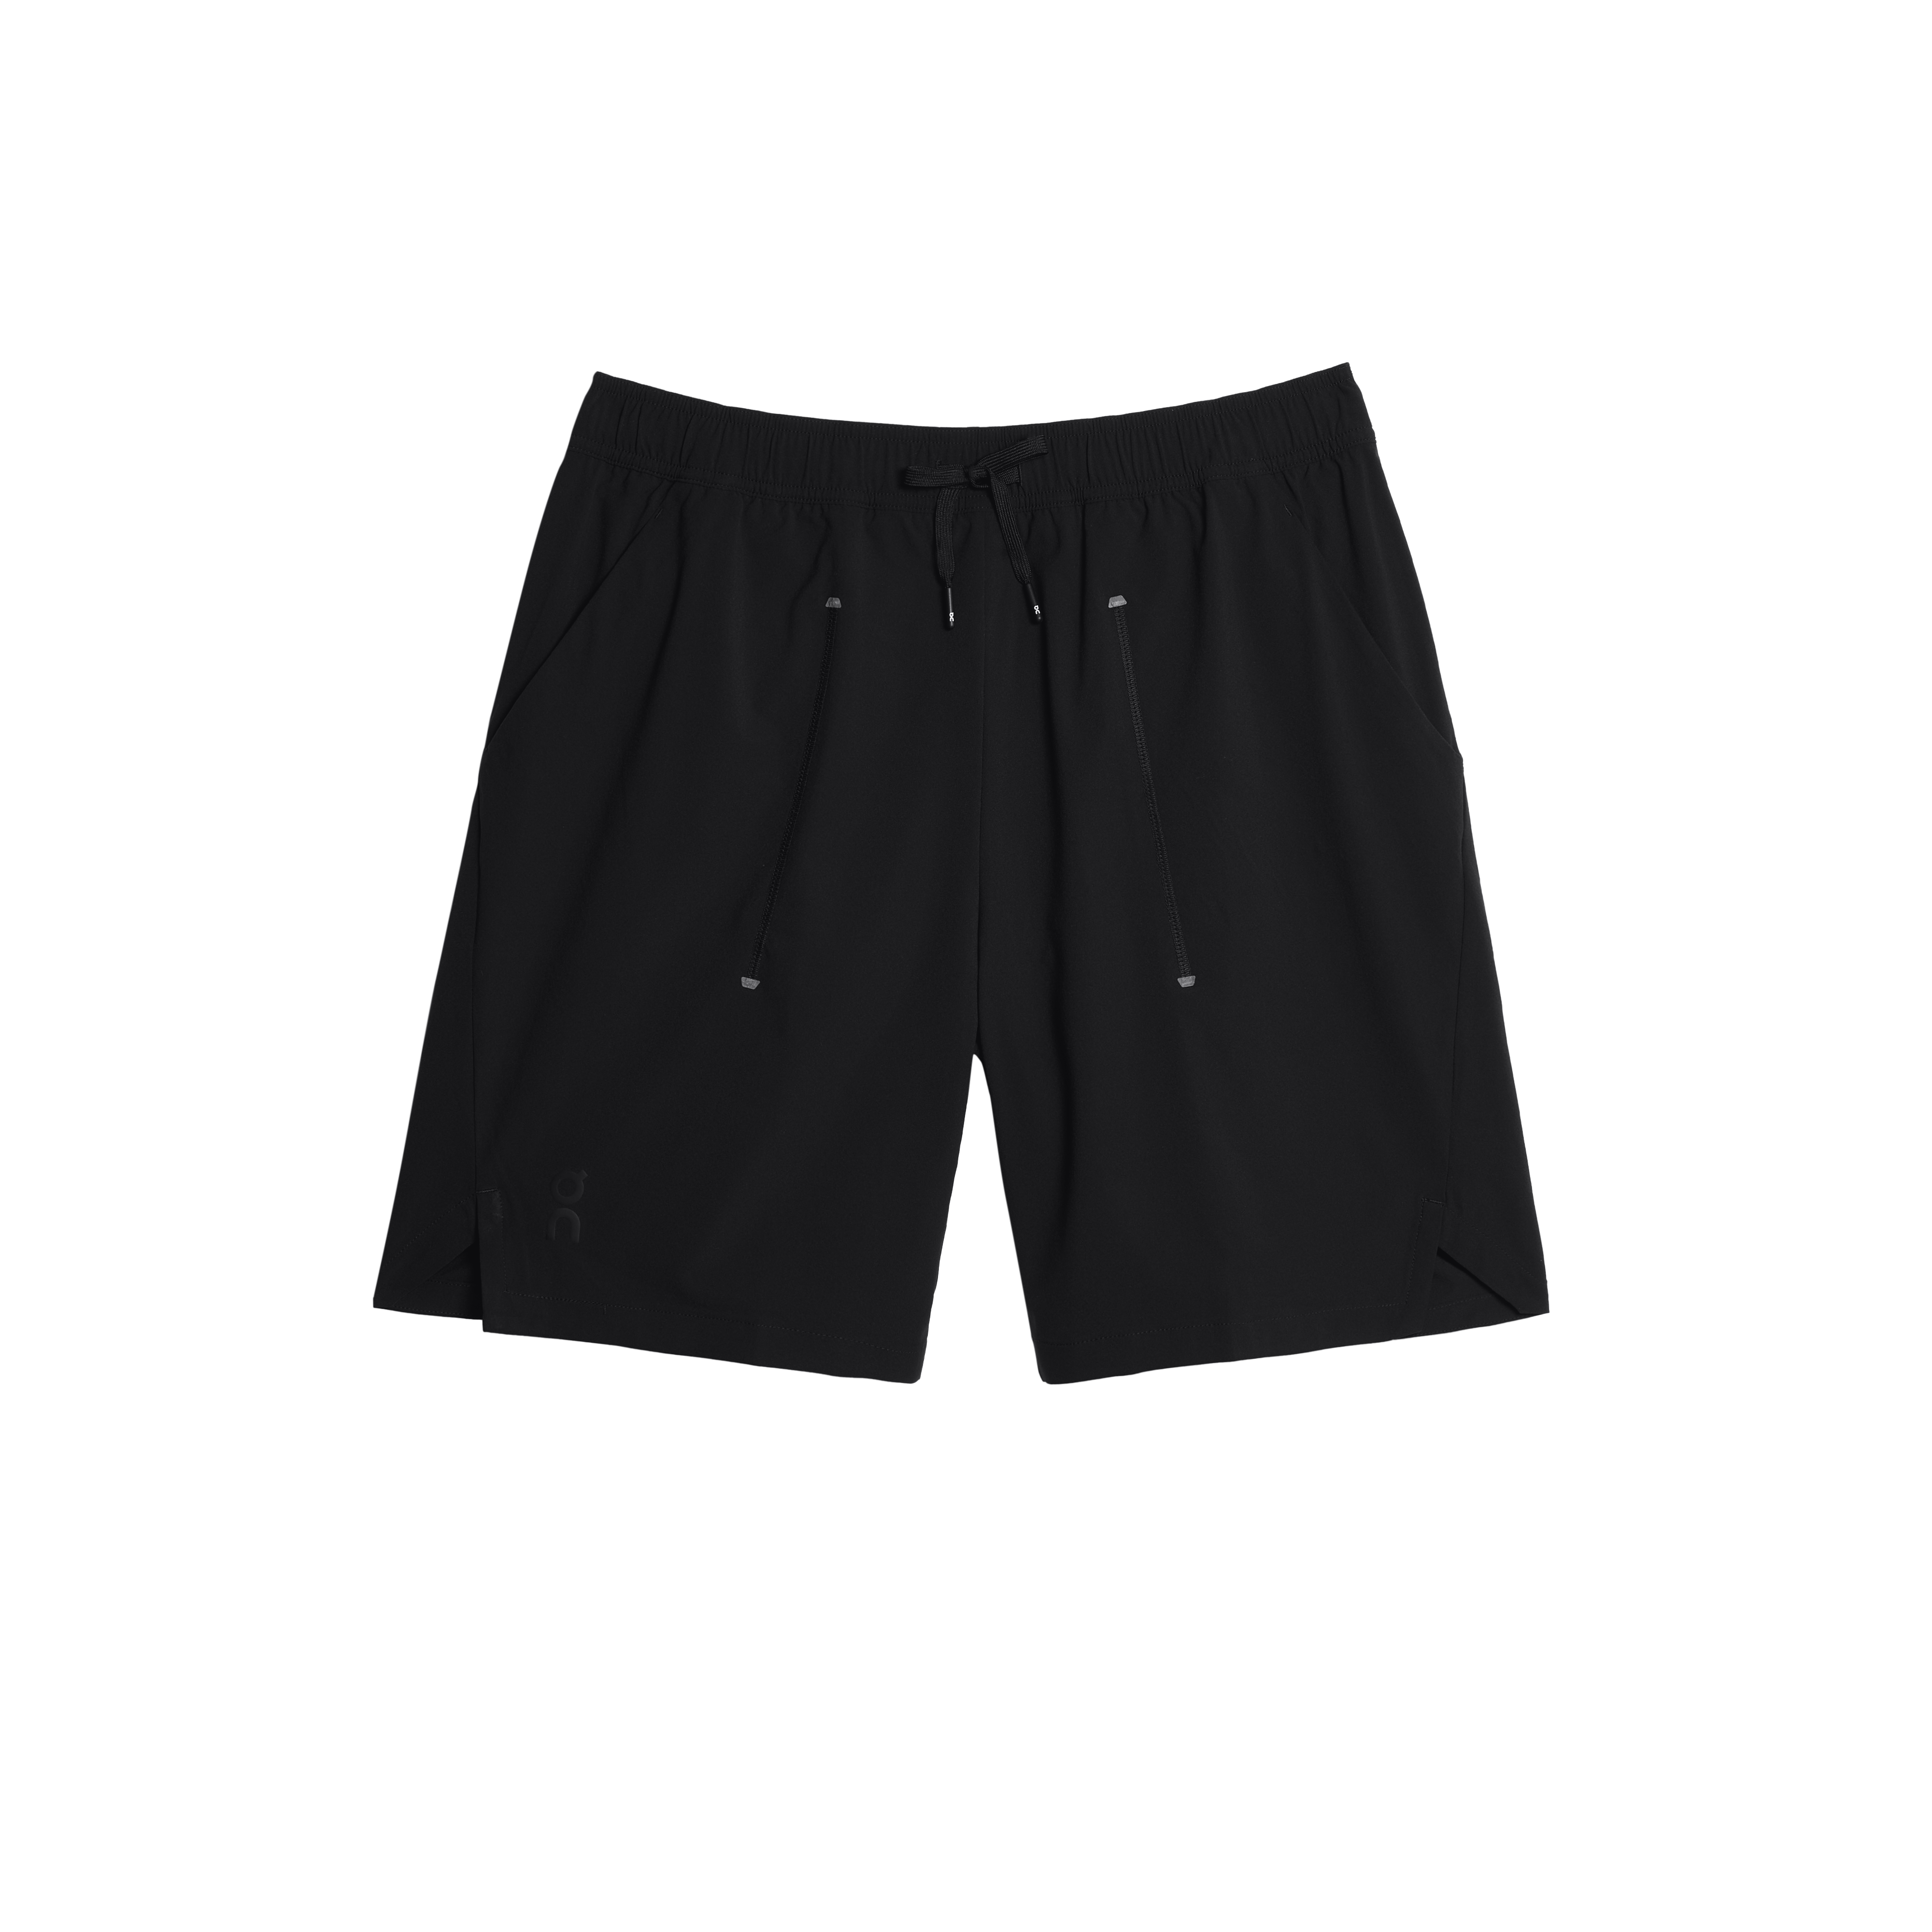 All Overs: Lined Men's Shorts Made For Performance